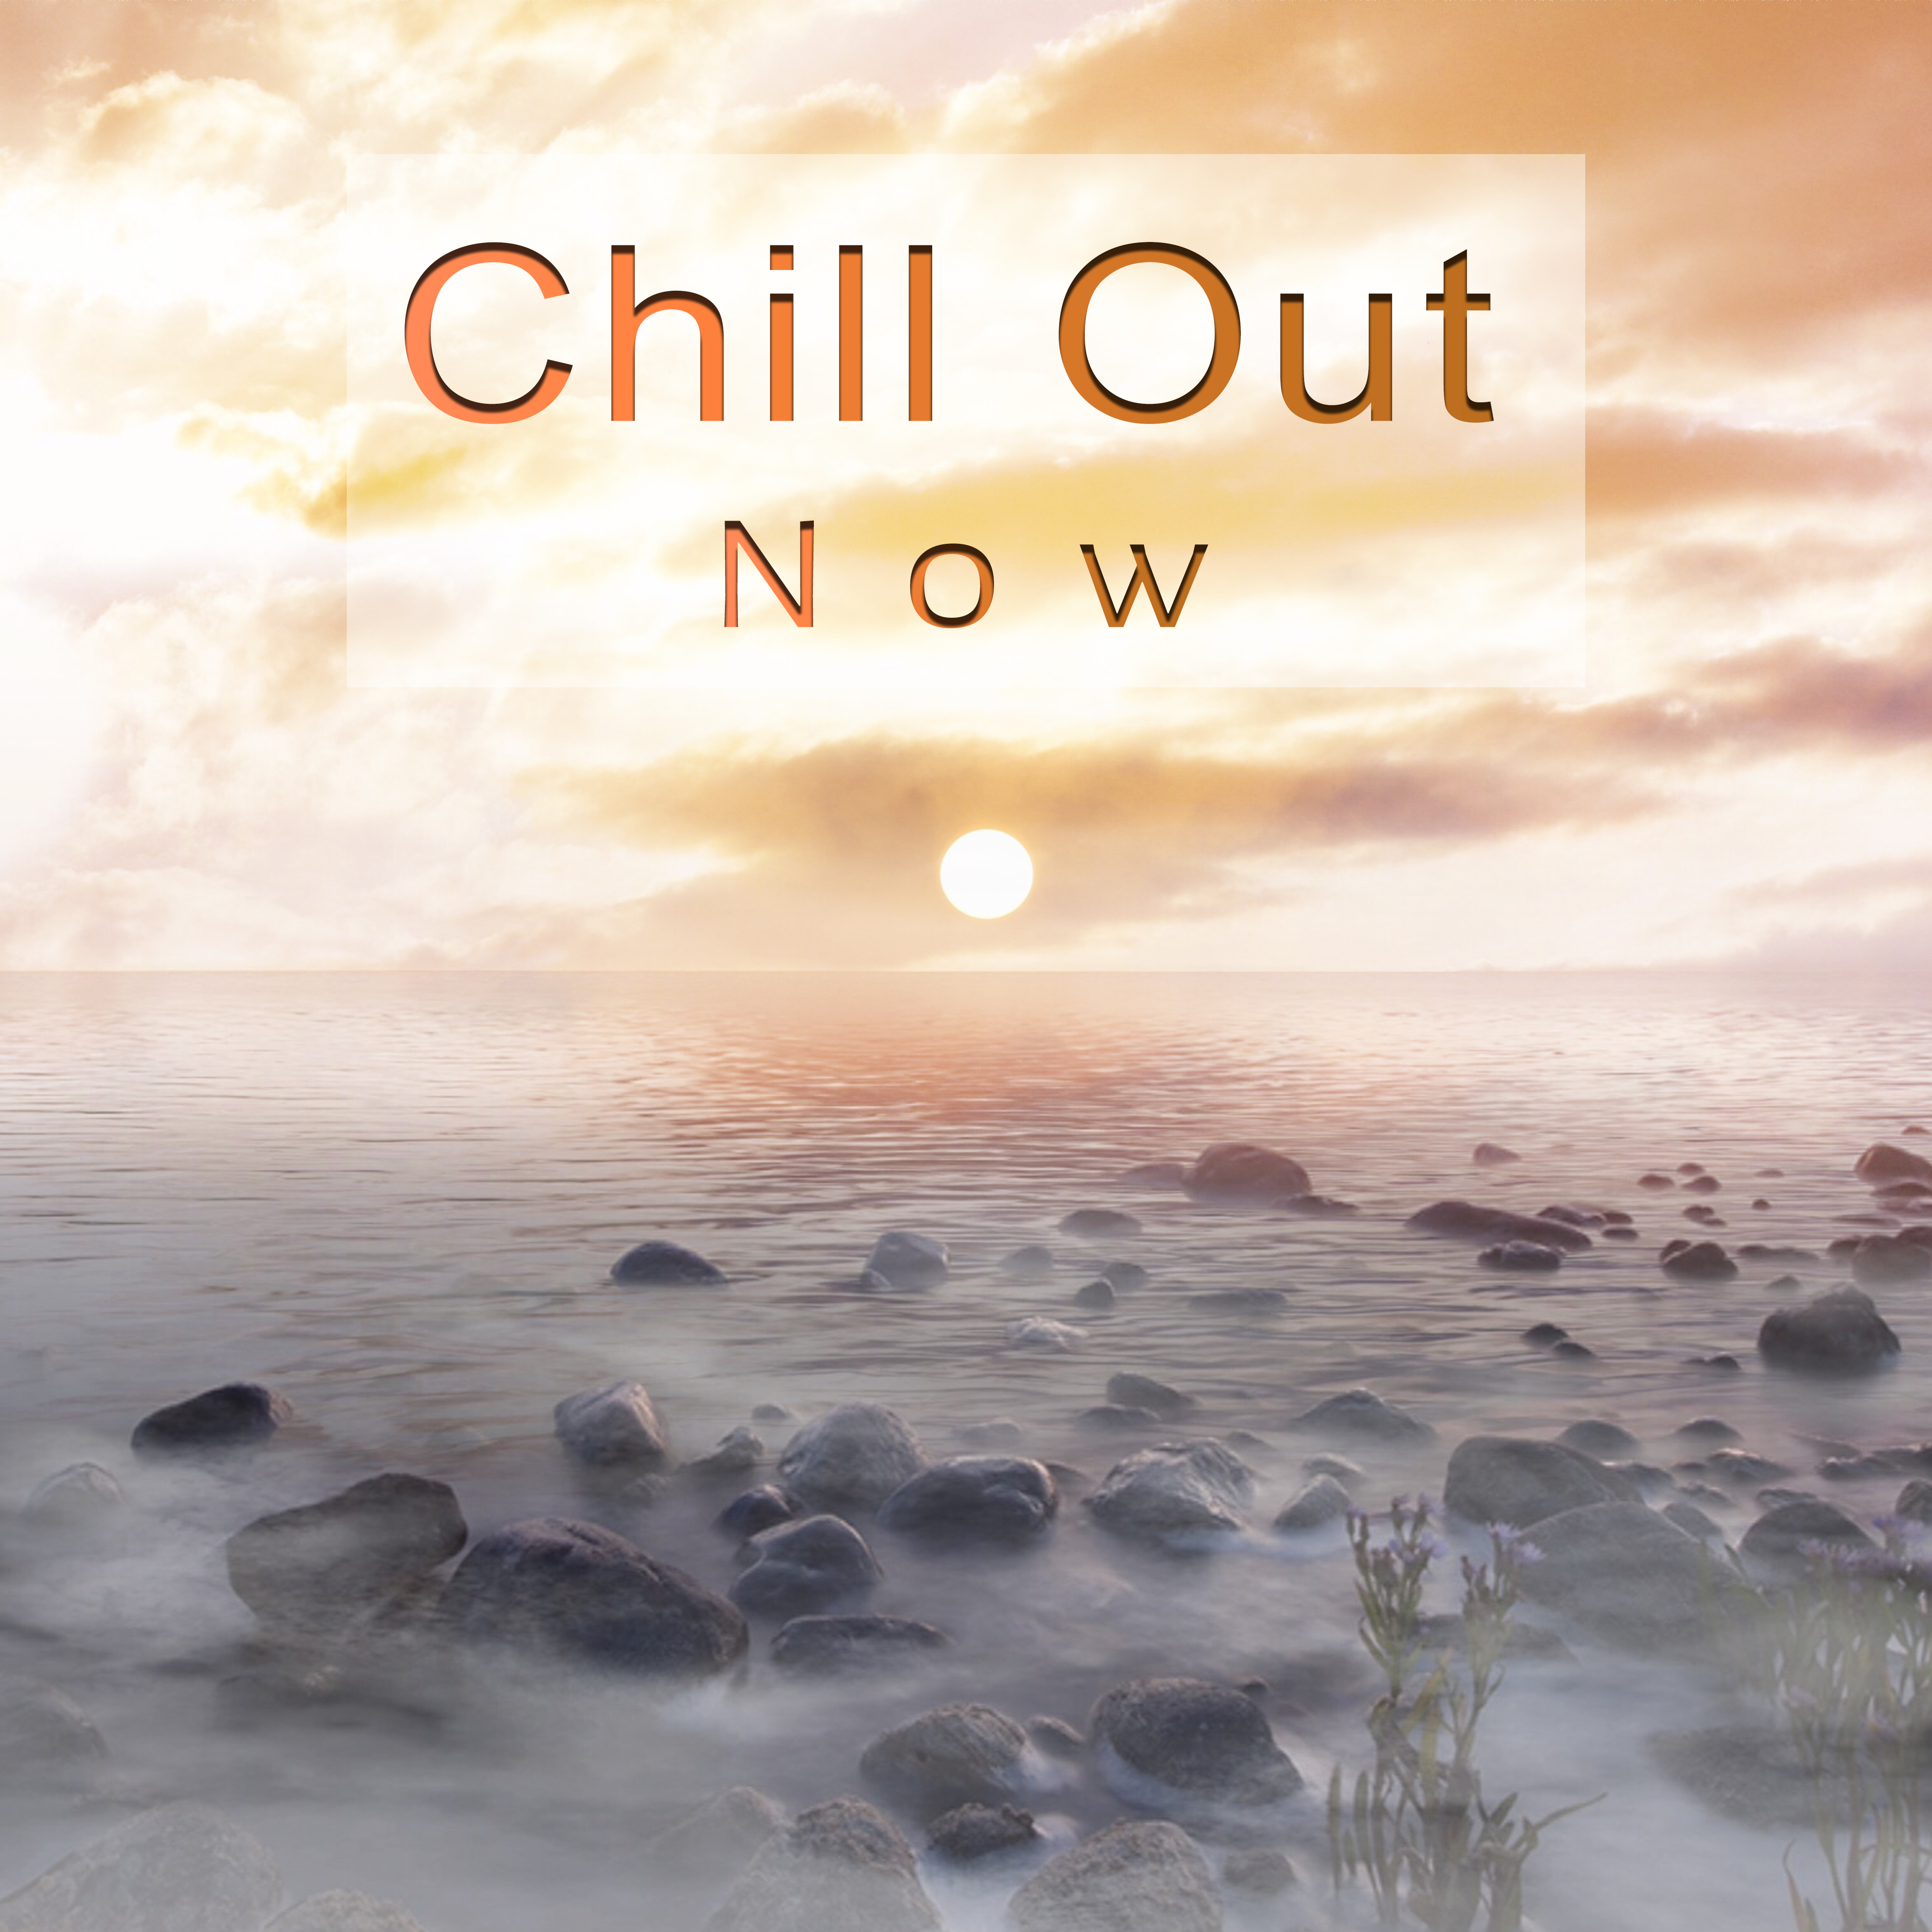 Chill Out Now  Summertime 2017, Bahama Chill, Beach Party, Hot Vibes 69, Relax, Ibiza Lounge